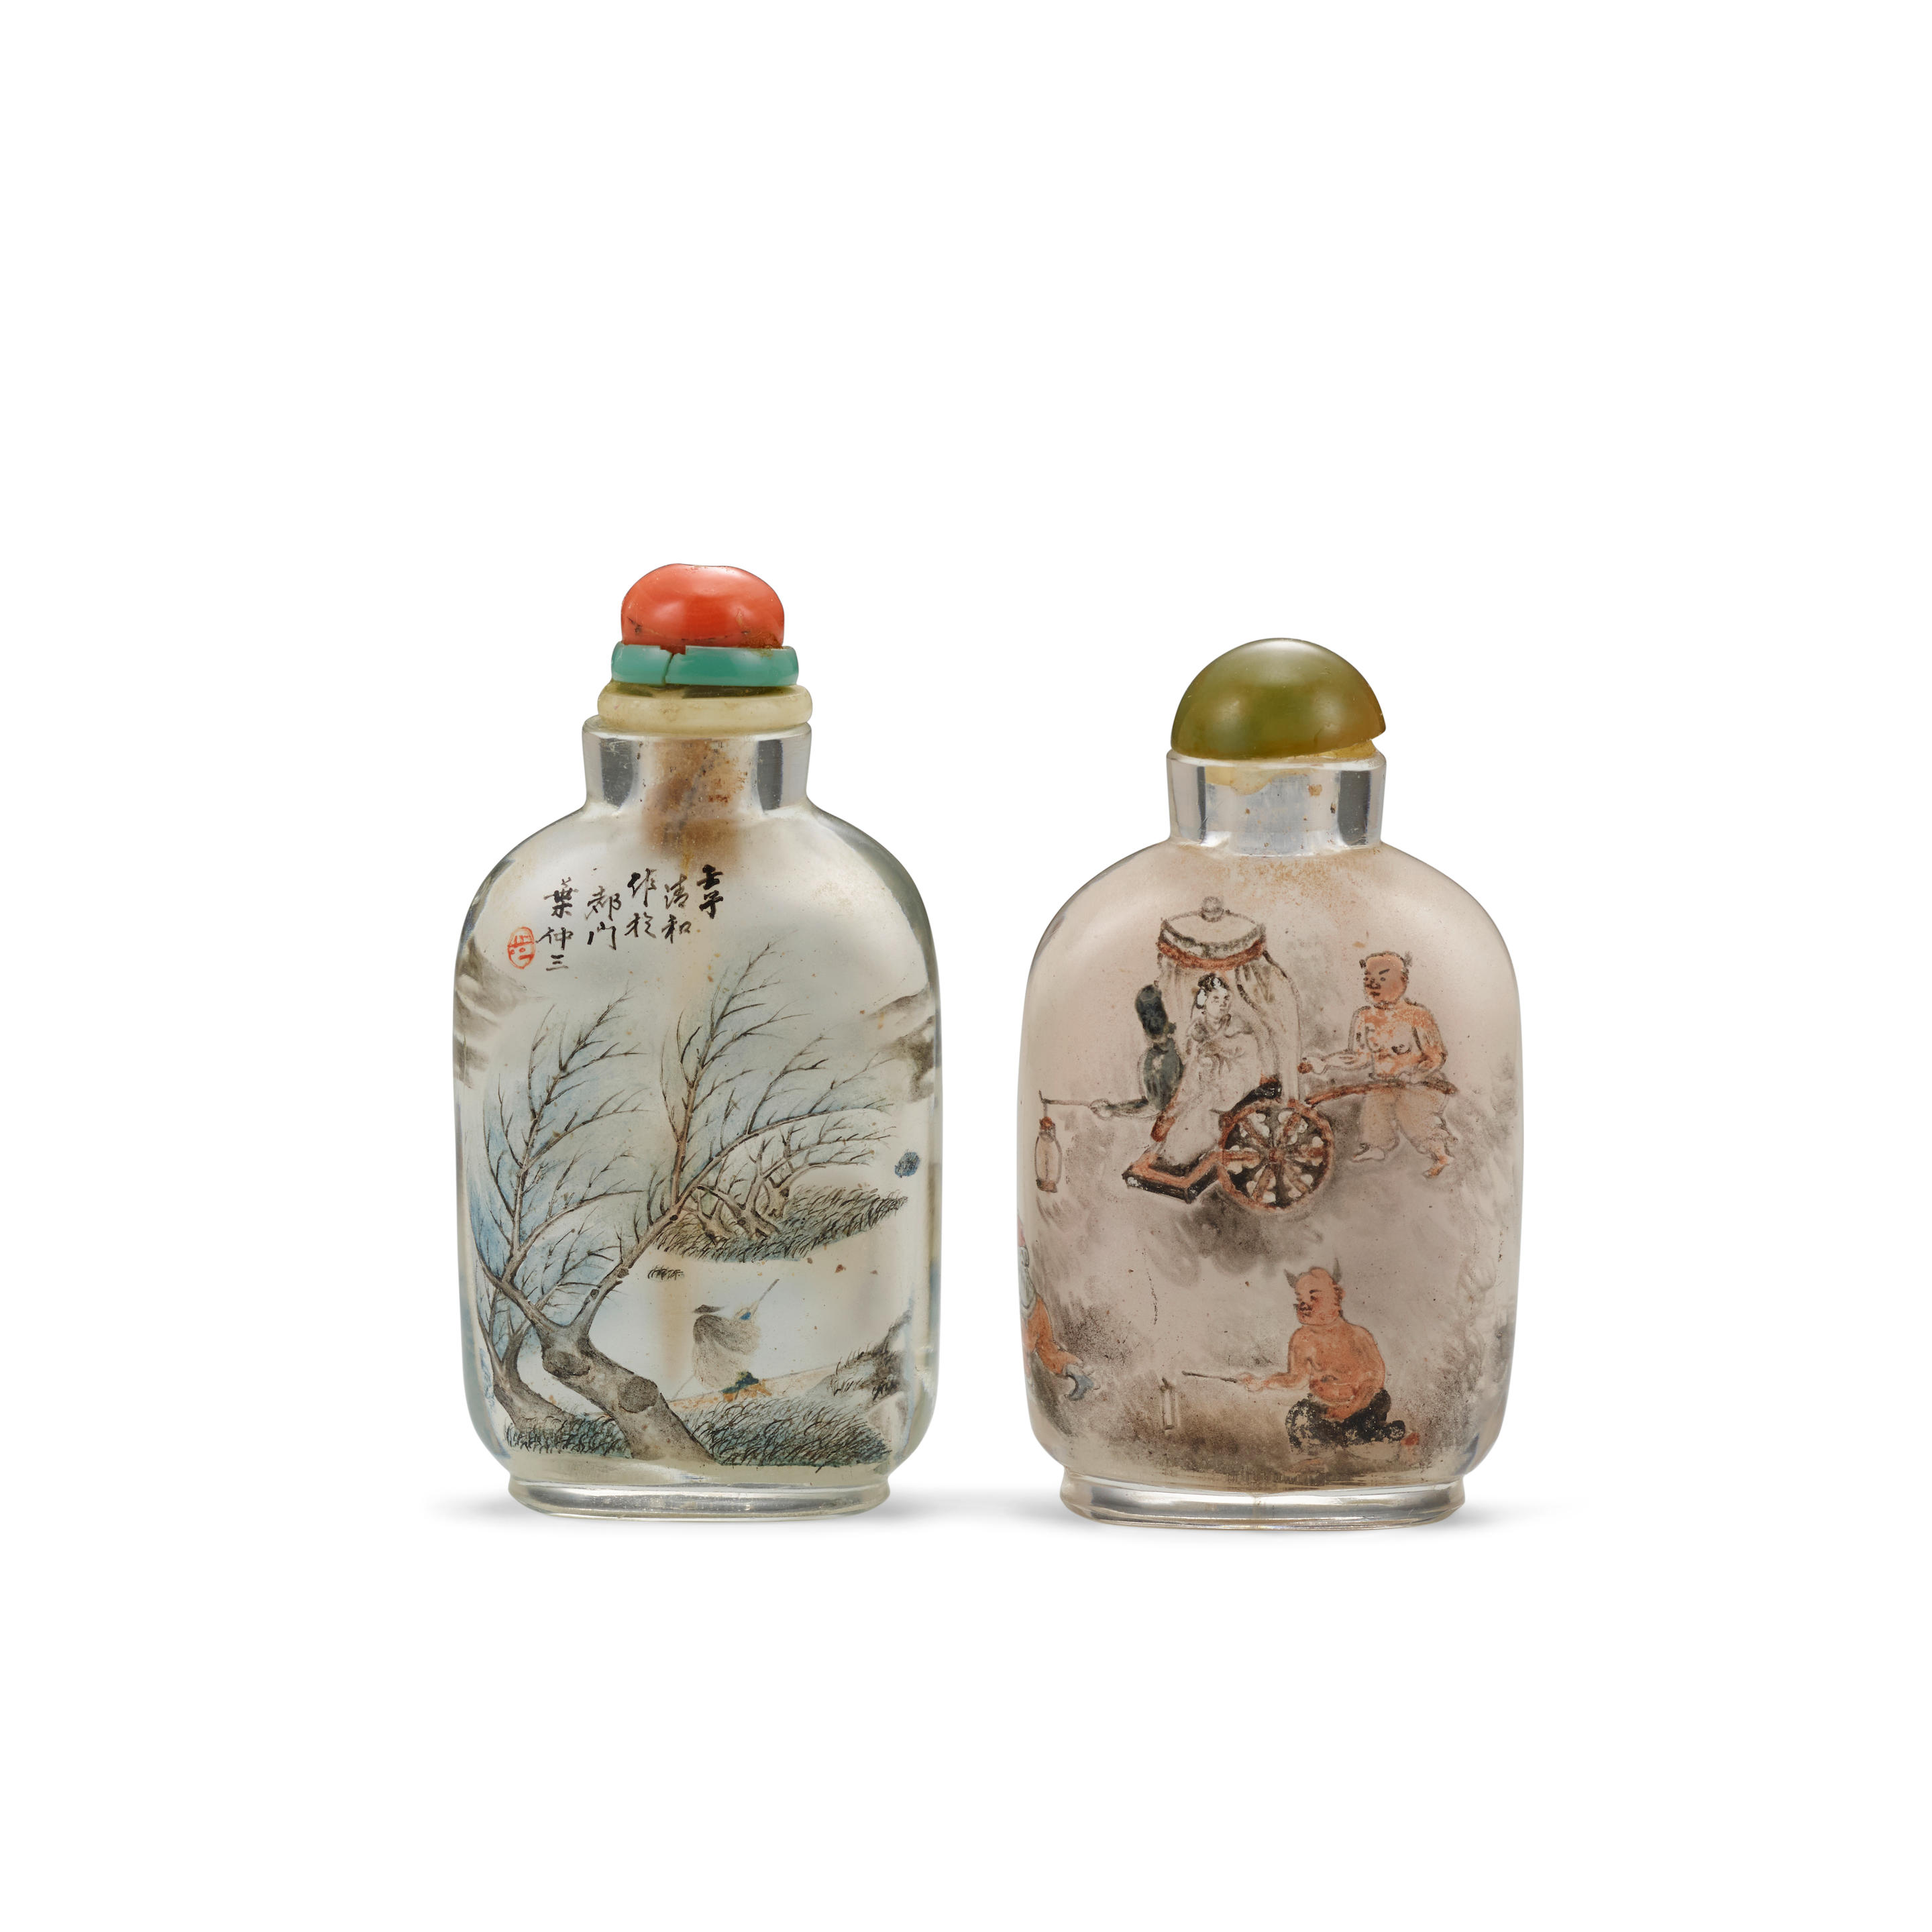 TWO INSIDE-PAINTED GLASS SNUFF